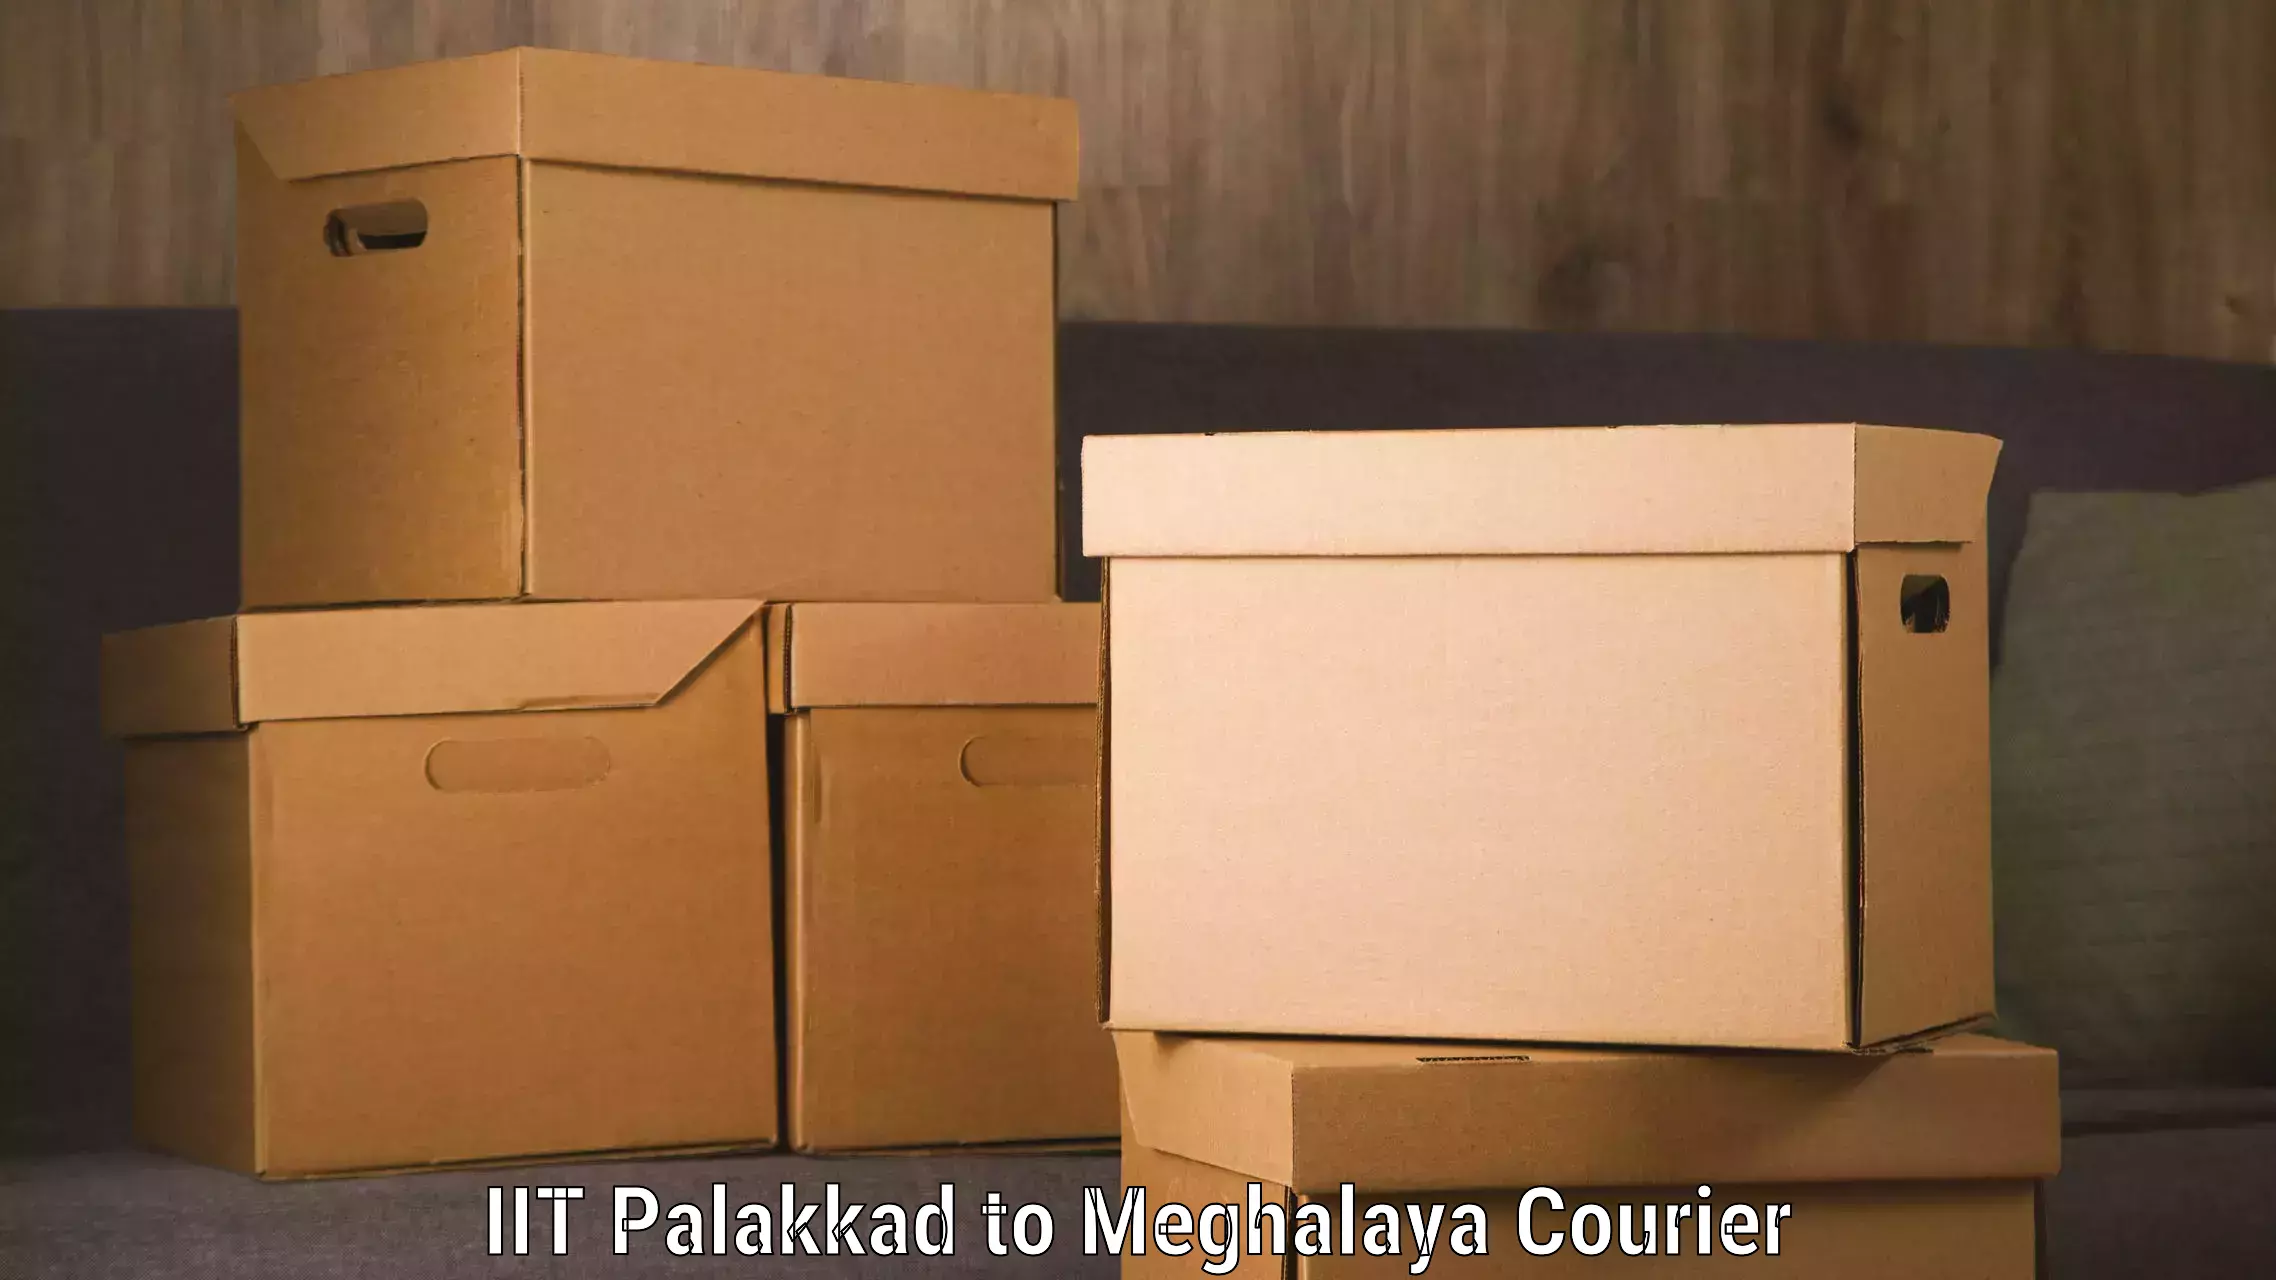 Express delivery solutions IIT Palakkad to Tura